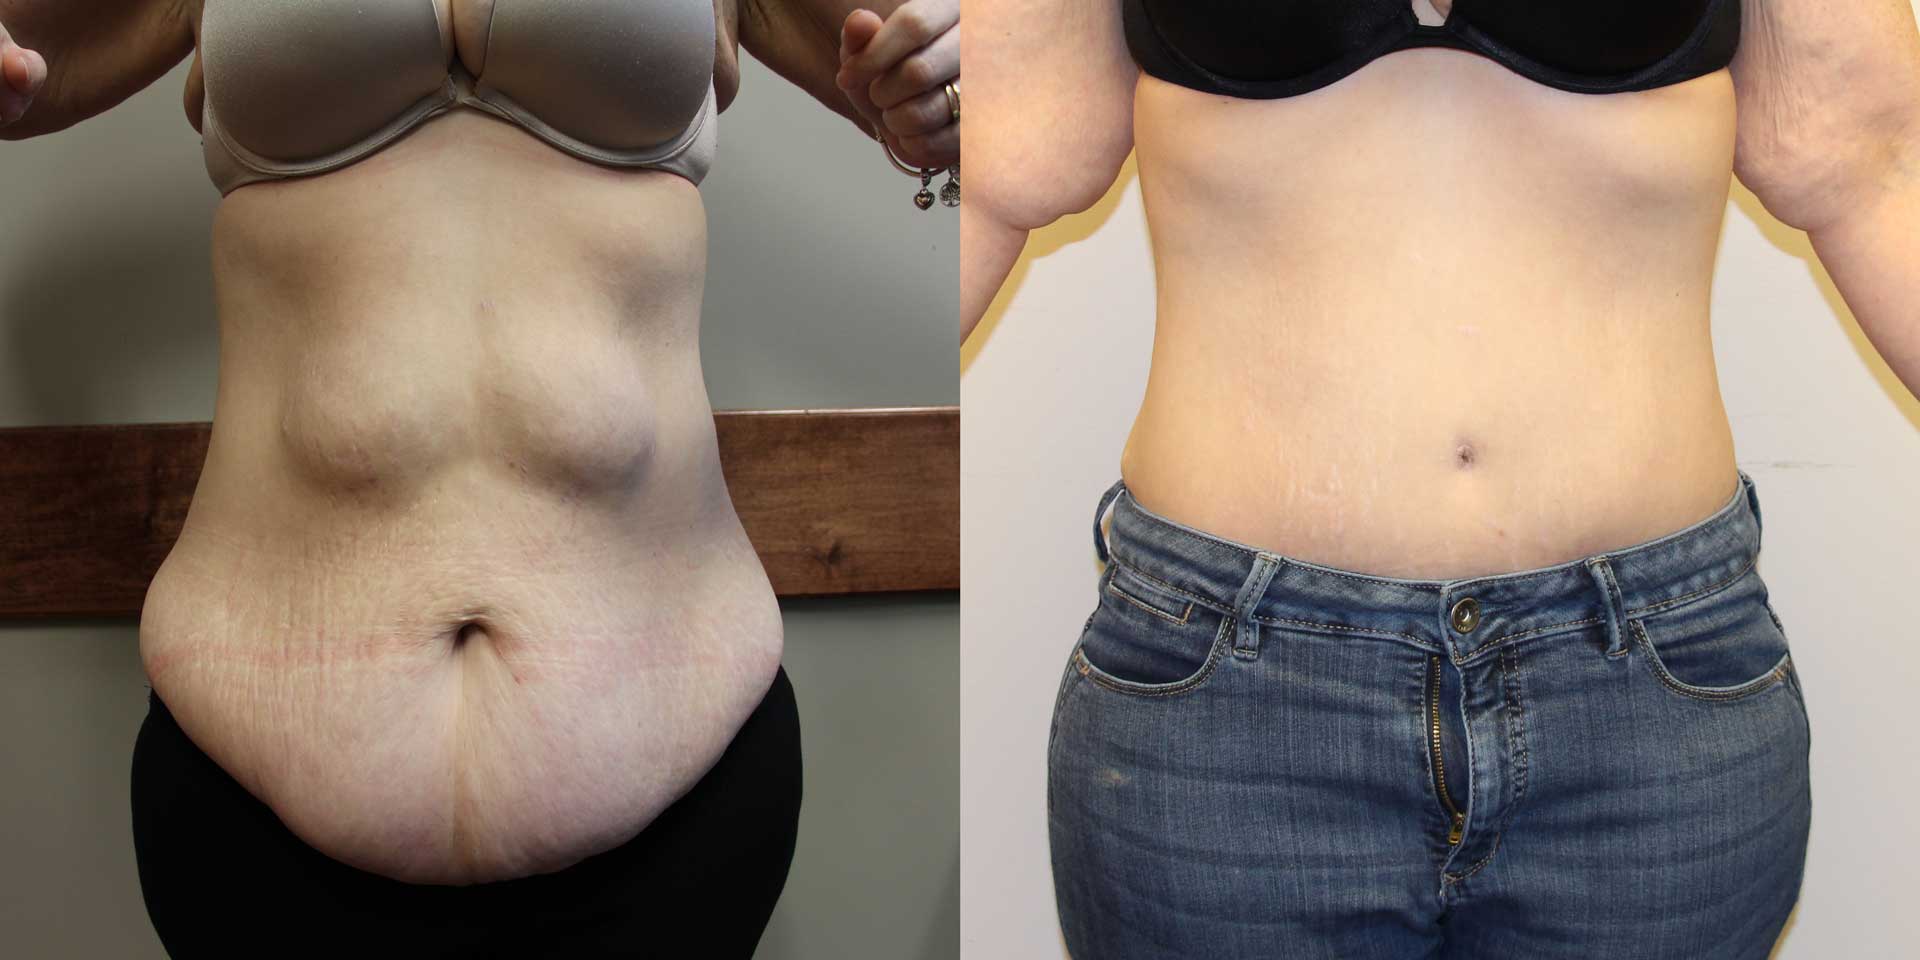 Tummy Tuck (Abdominoplasty) Before and After Photos - Dr Anzarut